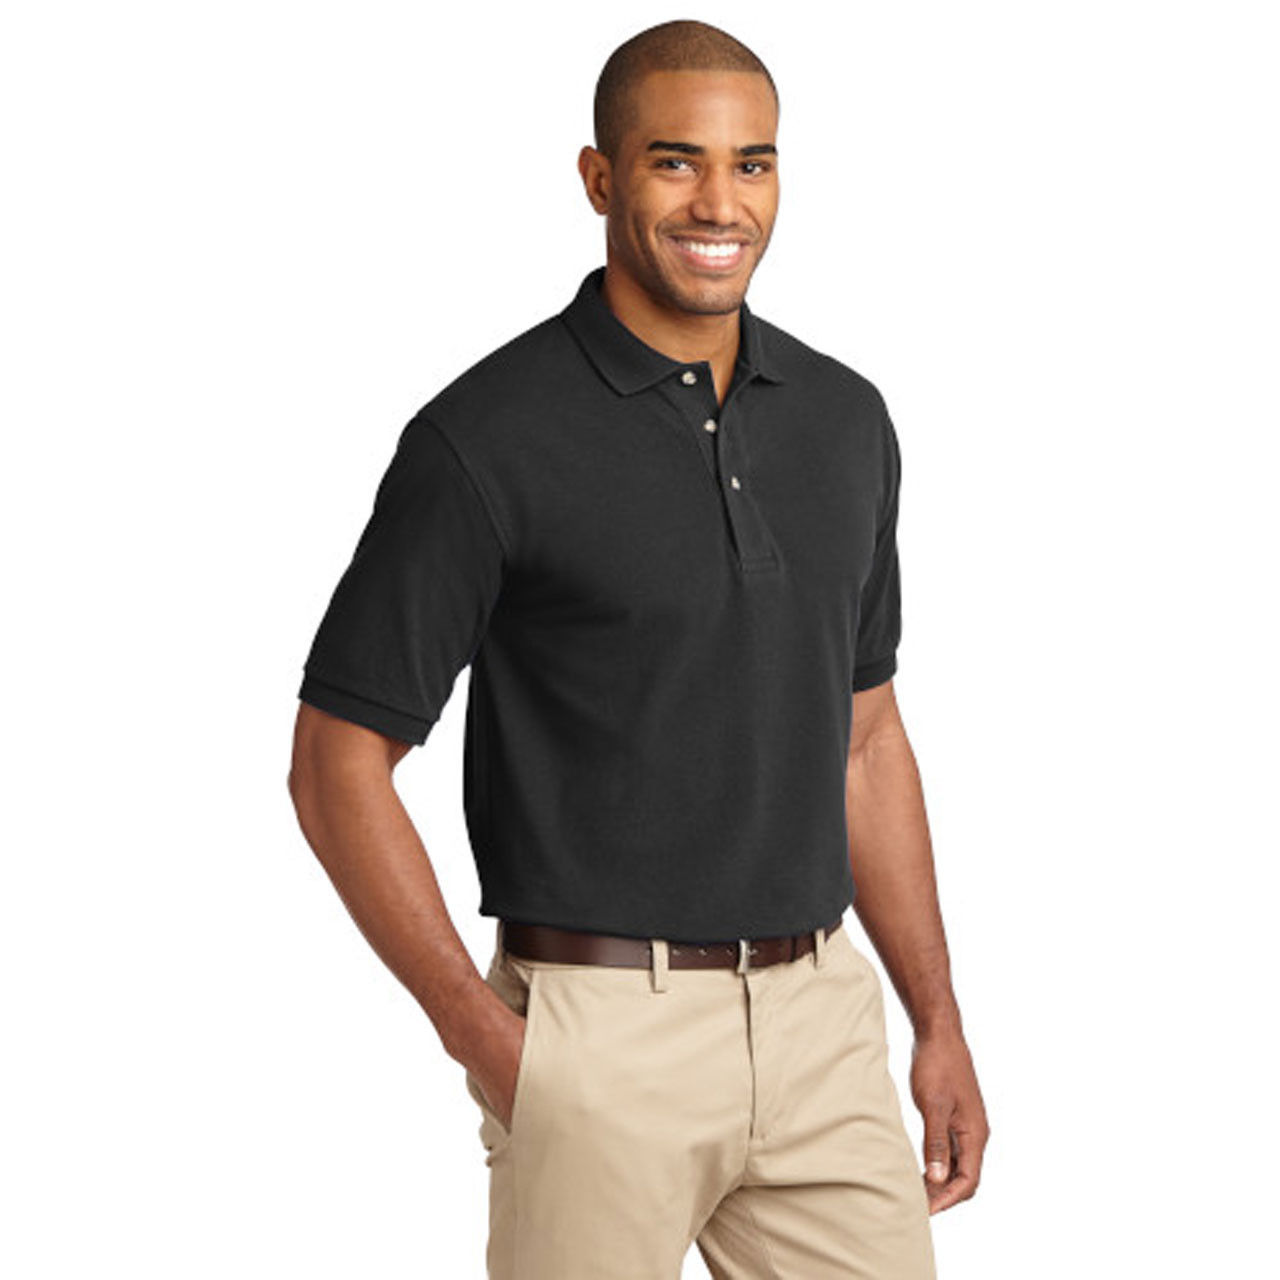 What comfort and reinforcement features are in the 100 cotton polo shirts wholesale K420?